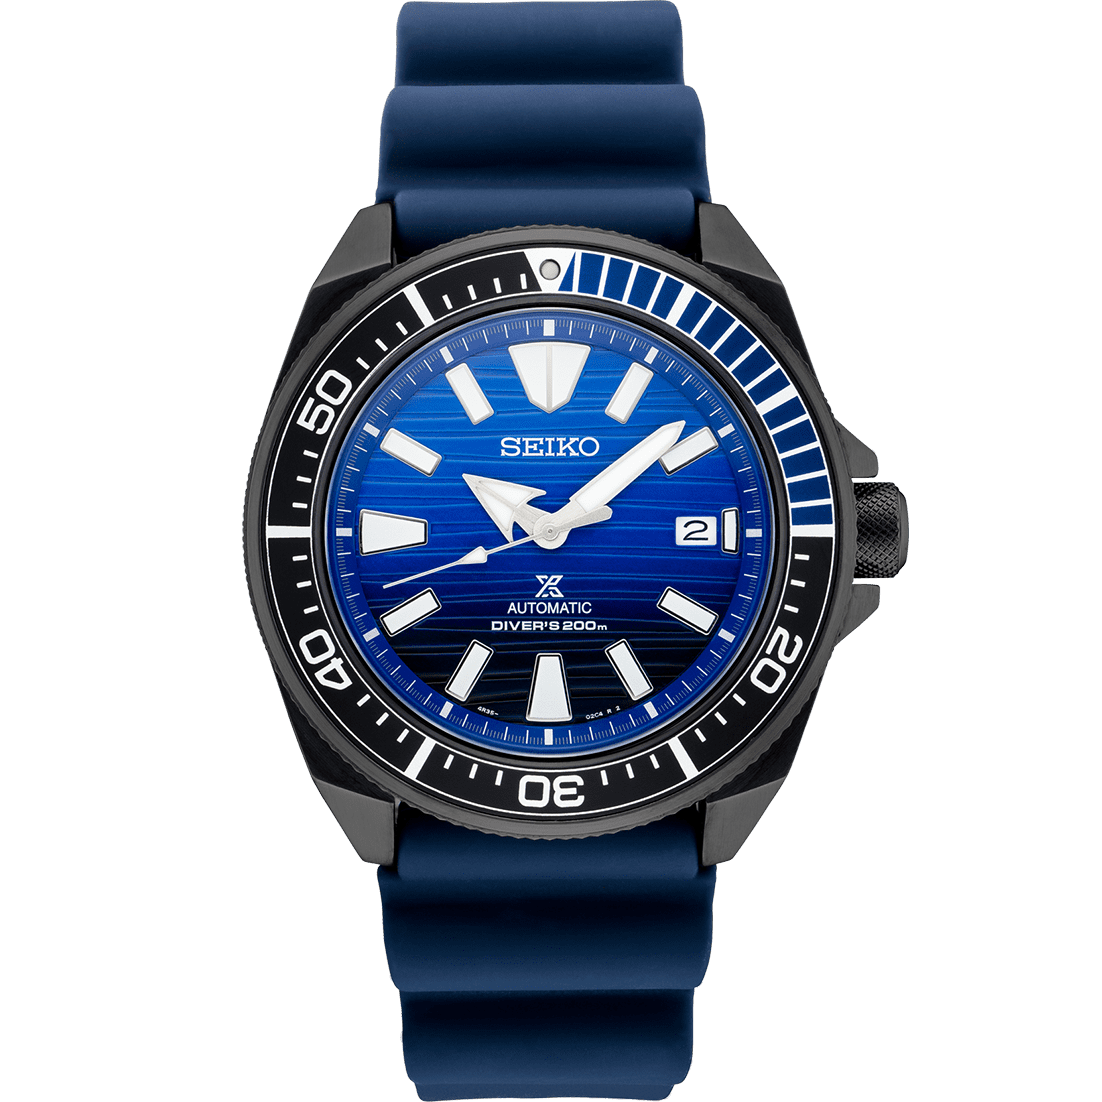 SRPD09 - SEIKO WATCHES | SINCE 1881